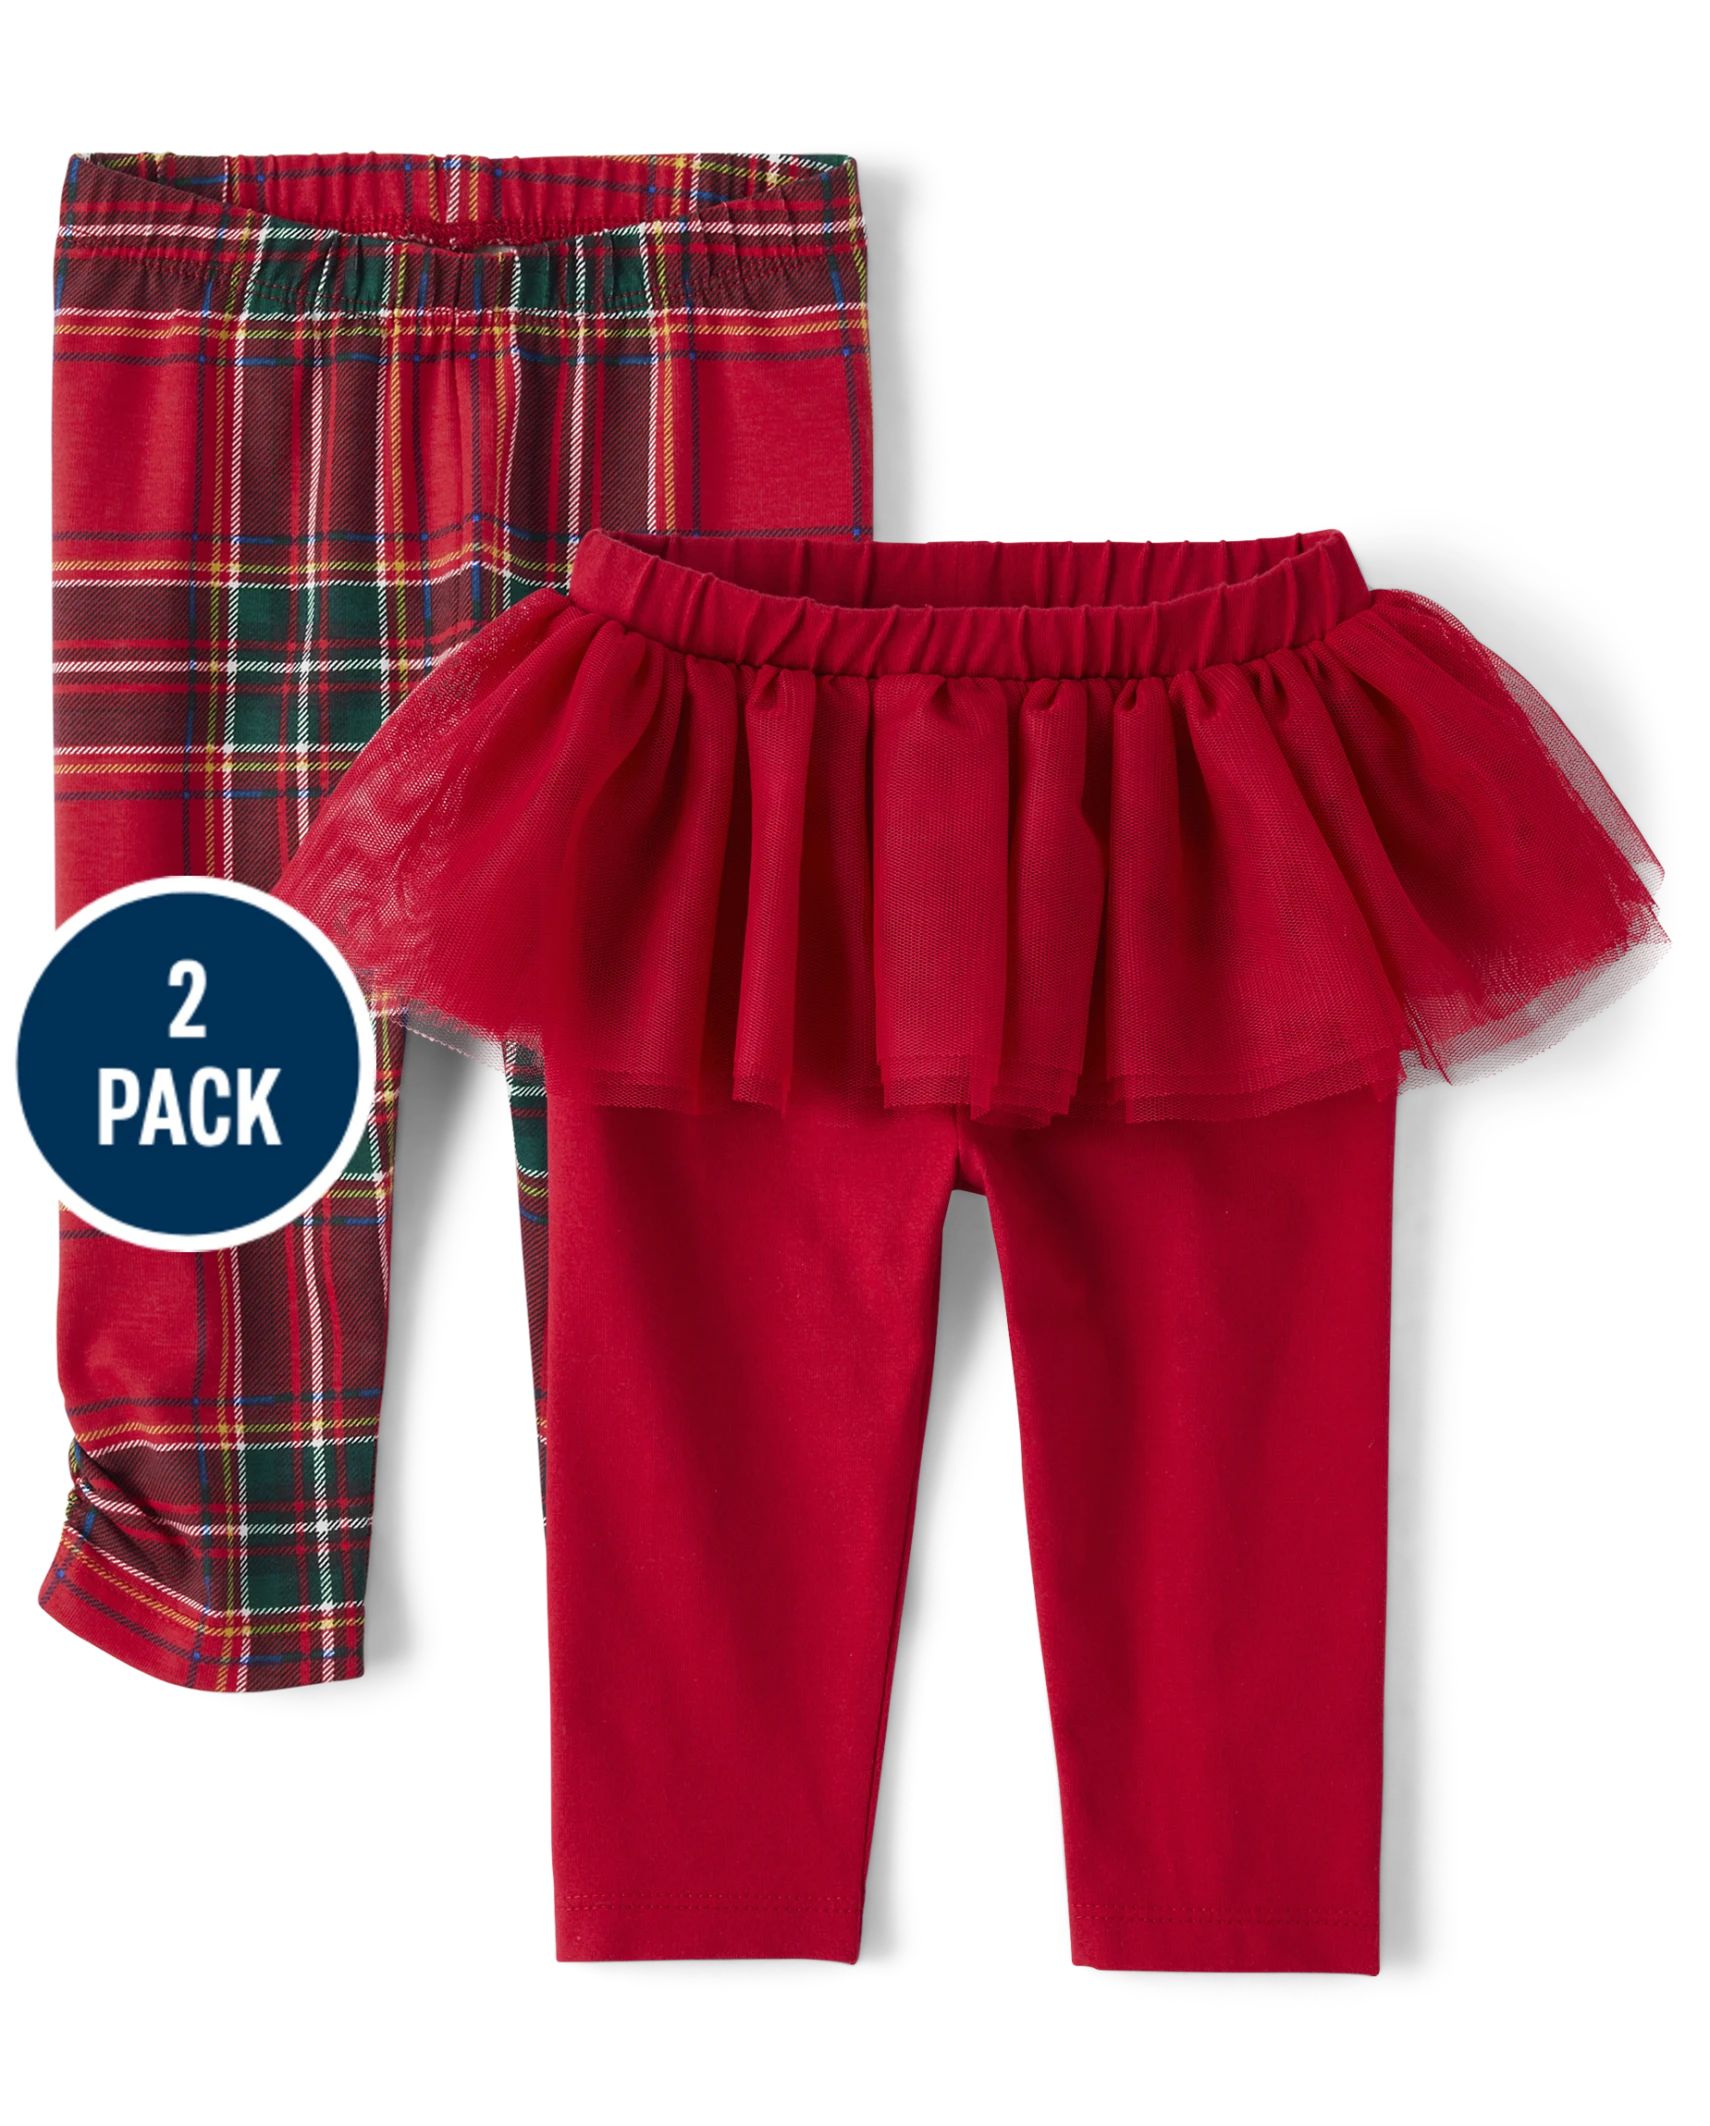 Baby Girls Plaid Tutu Leggings 2-Pack - classicred | The Children's Place